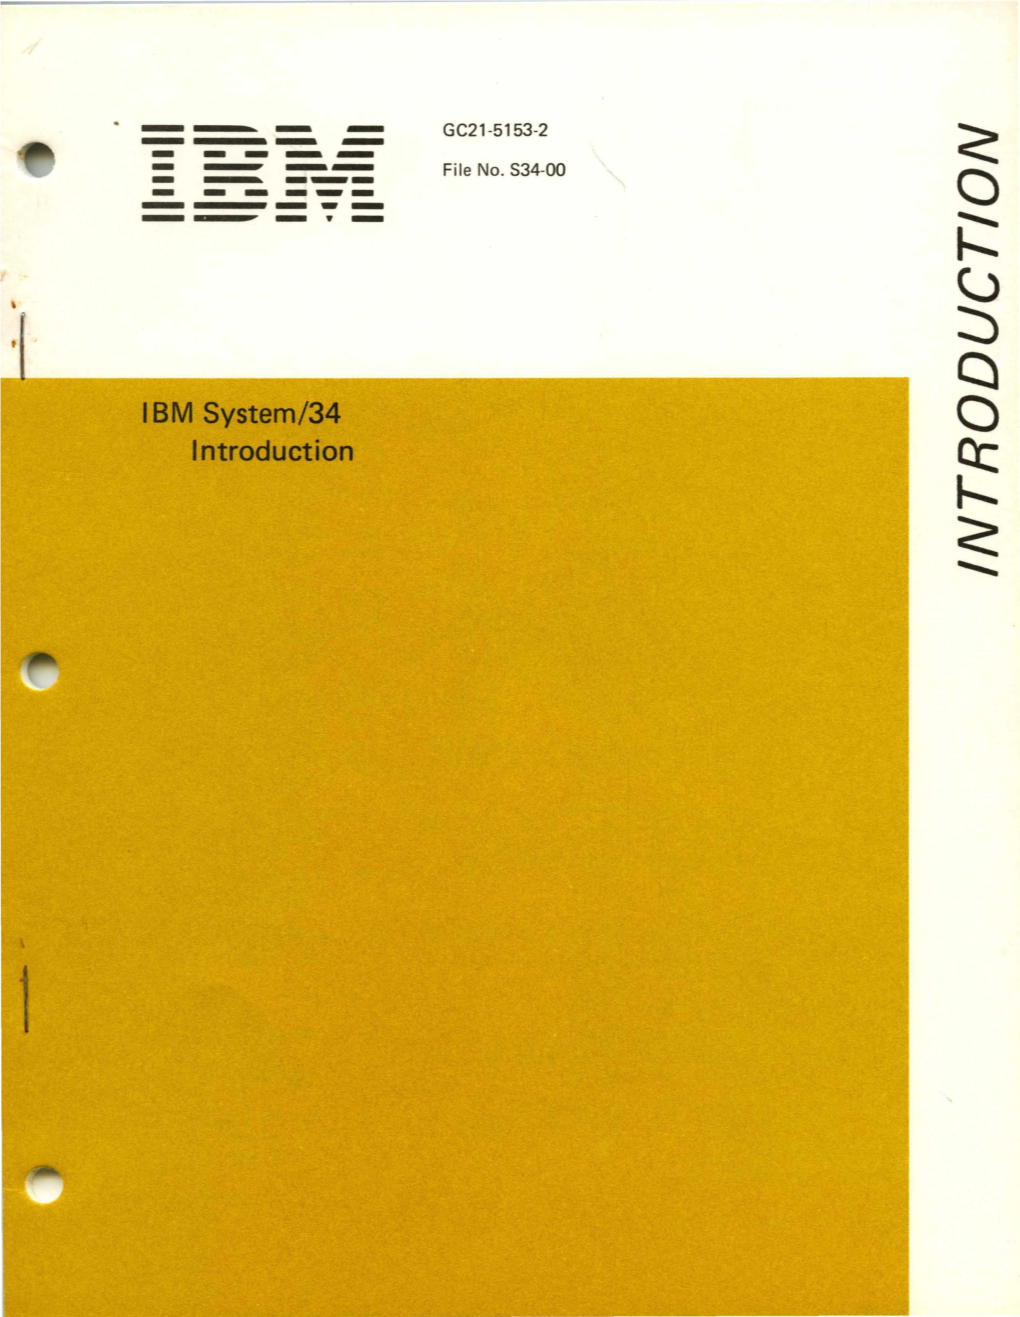 IBM System/34 Introduction - -- GC21-5153-2 ------File No